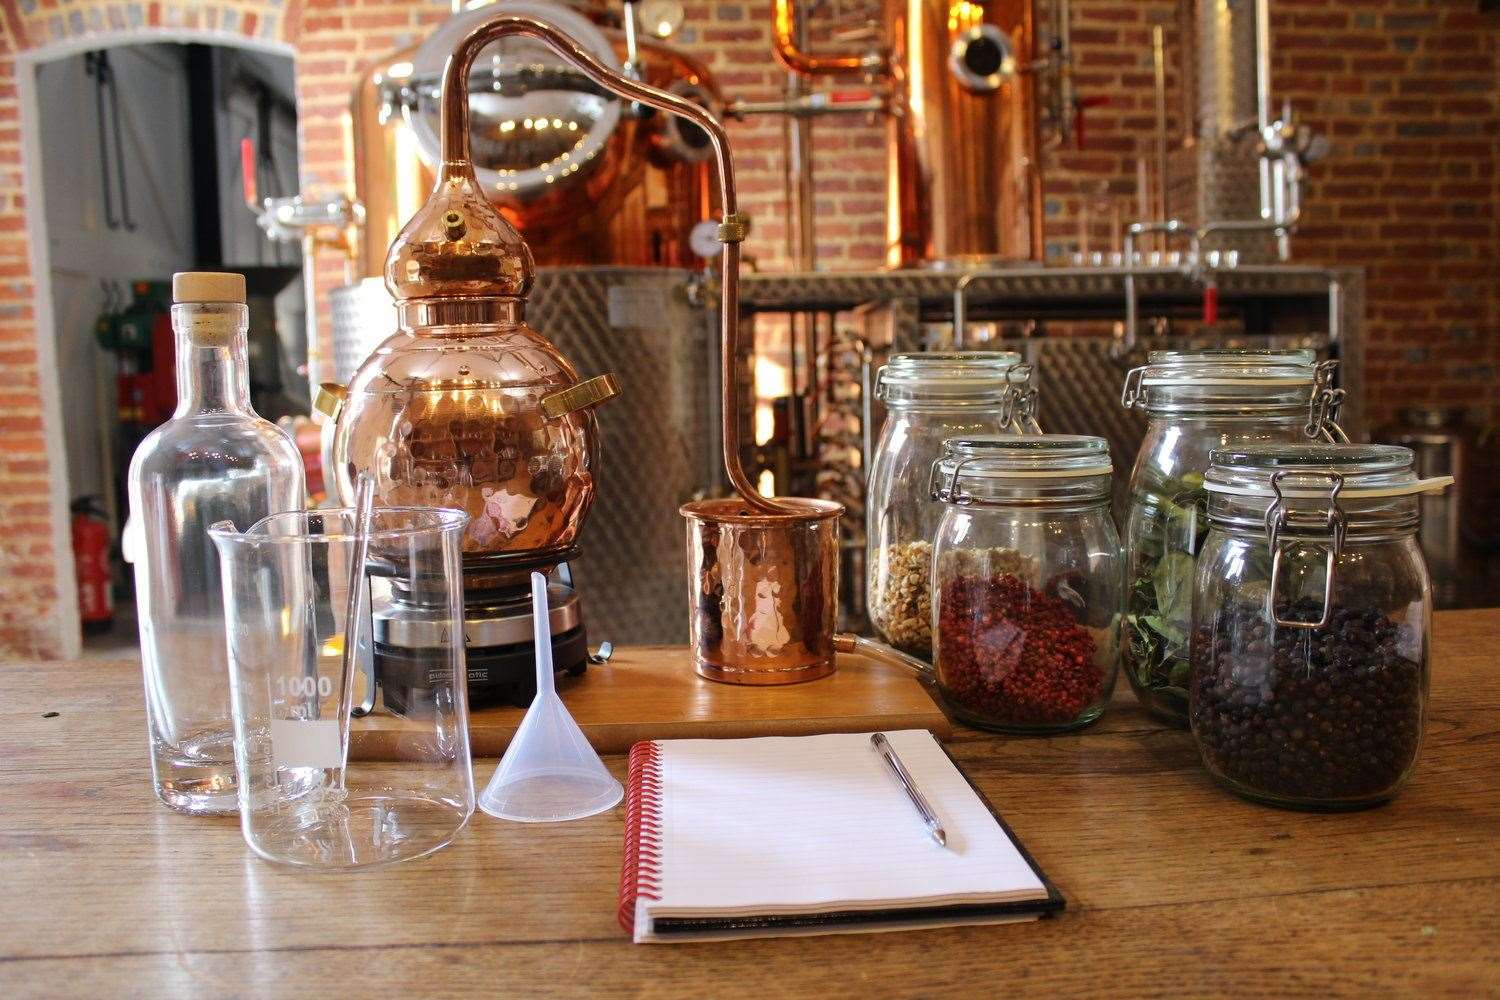 The distillery was started in 2015 and produces a range of spirits